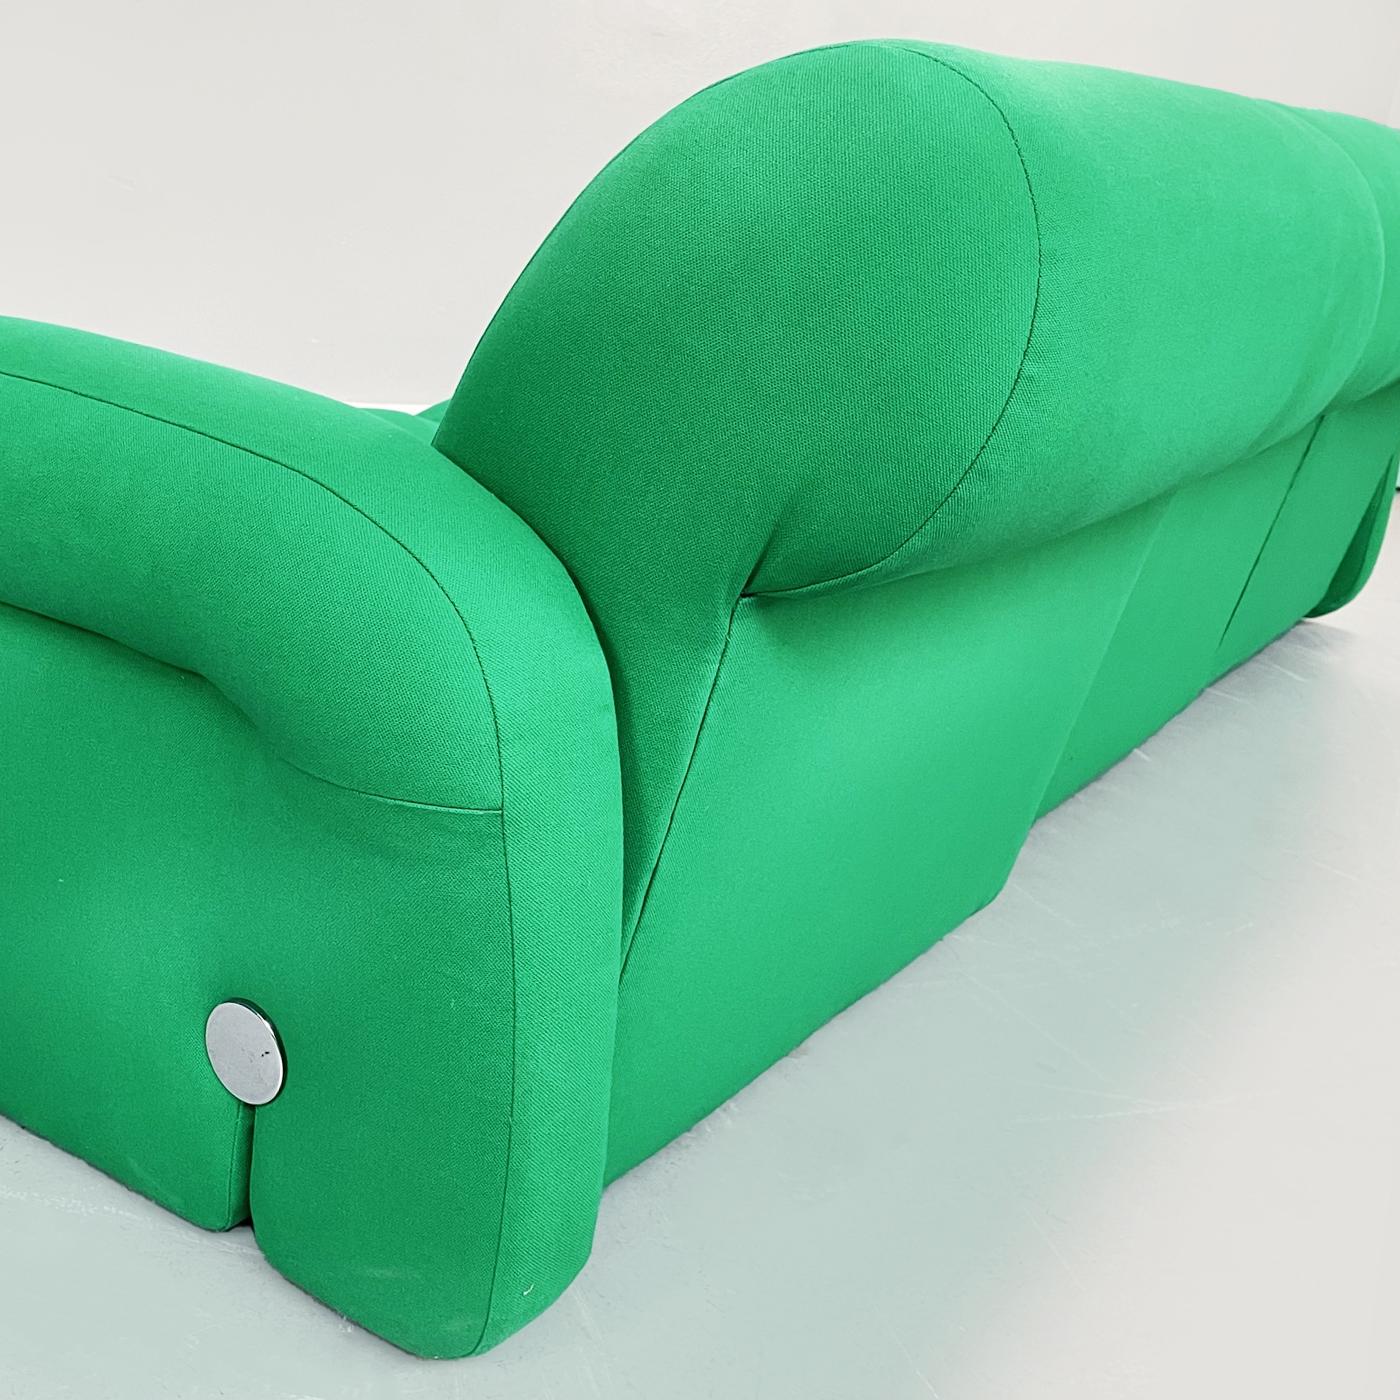 Italian Space Age Modular Sofa in Green Fabric with Metal Insert, 1970s For Sale 14